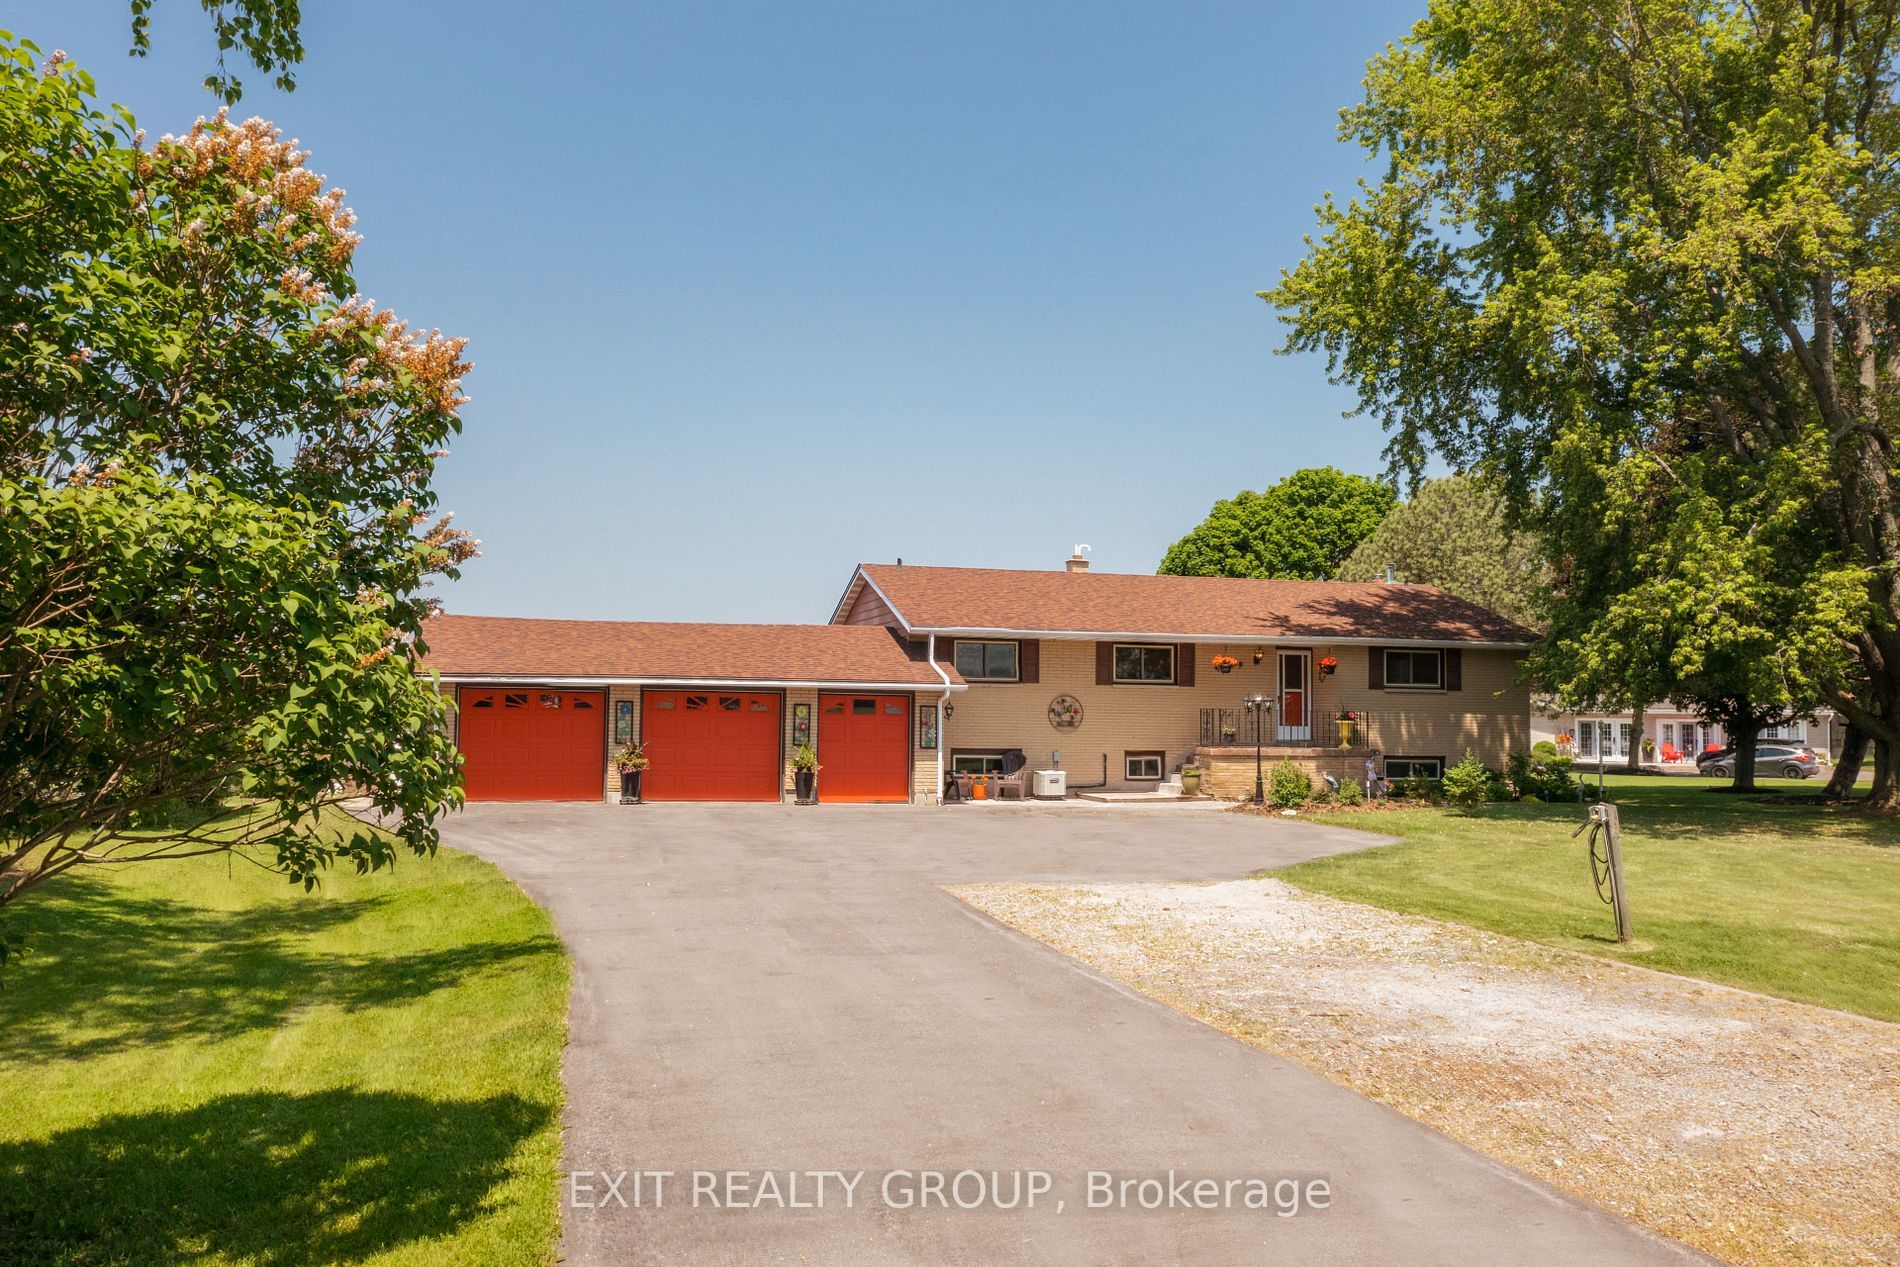 I have sold a property at 167 Massassauga RD in Prince Edward County
